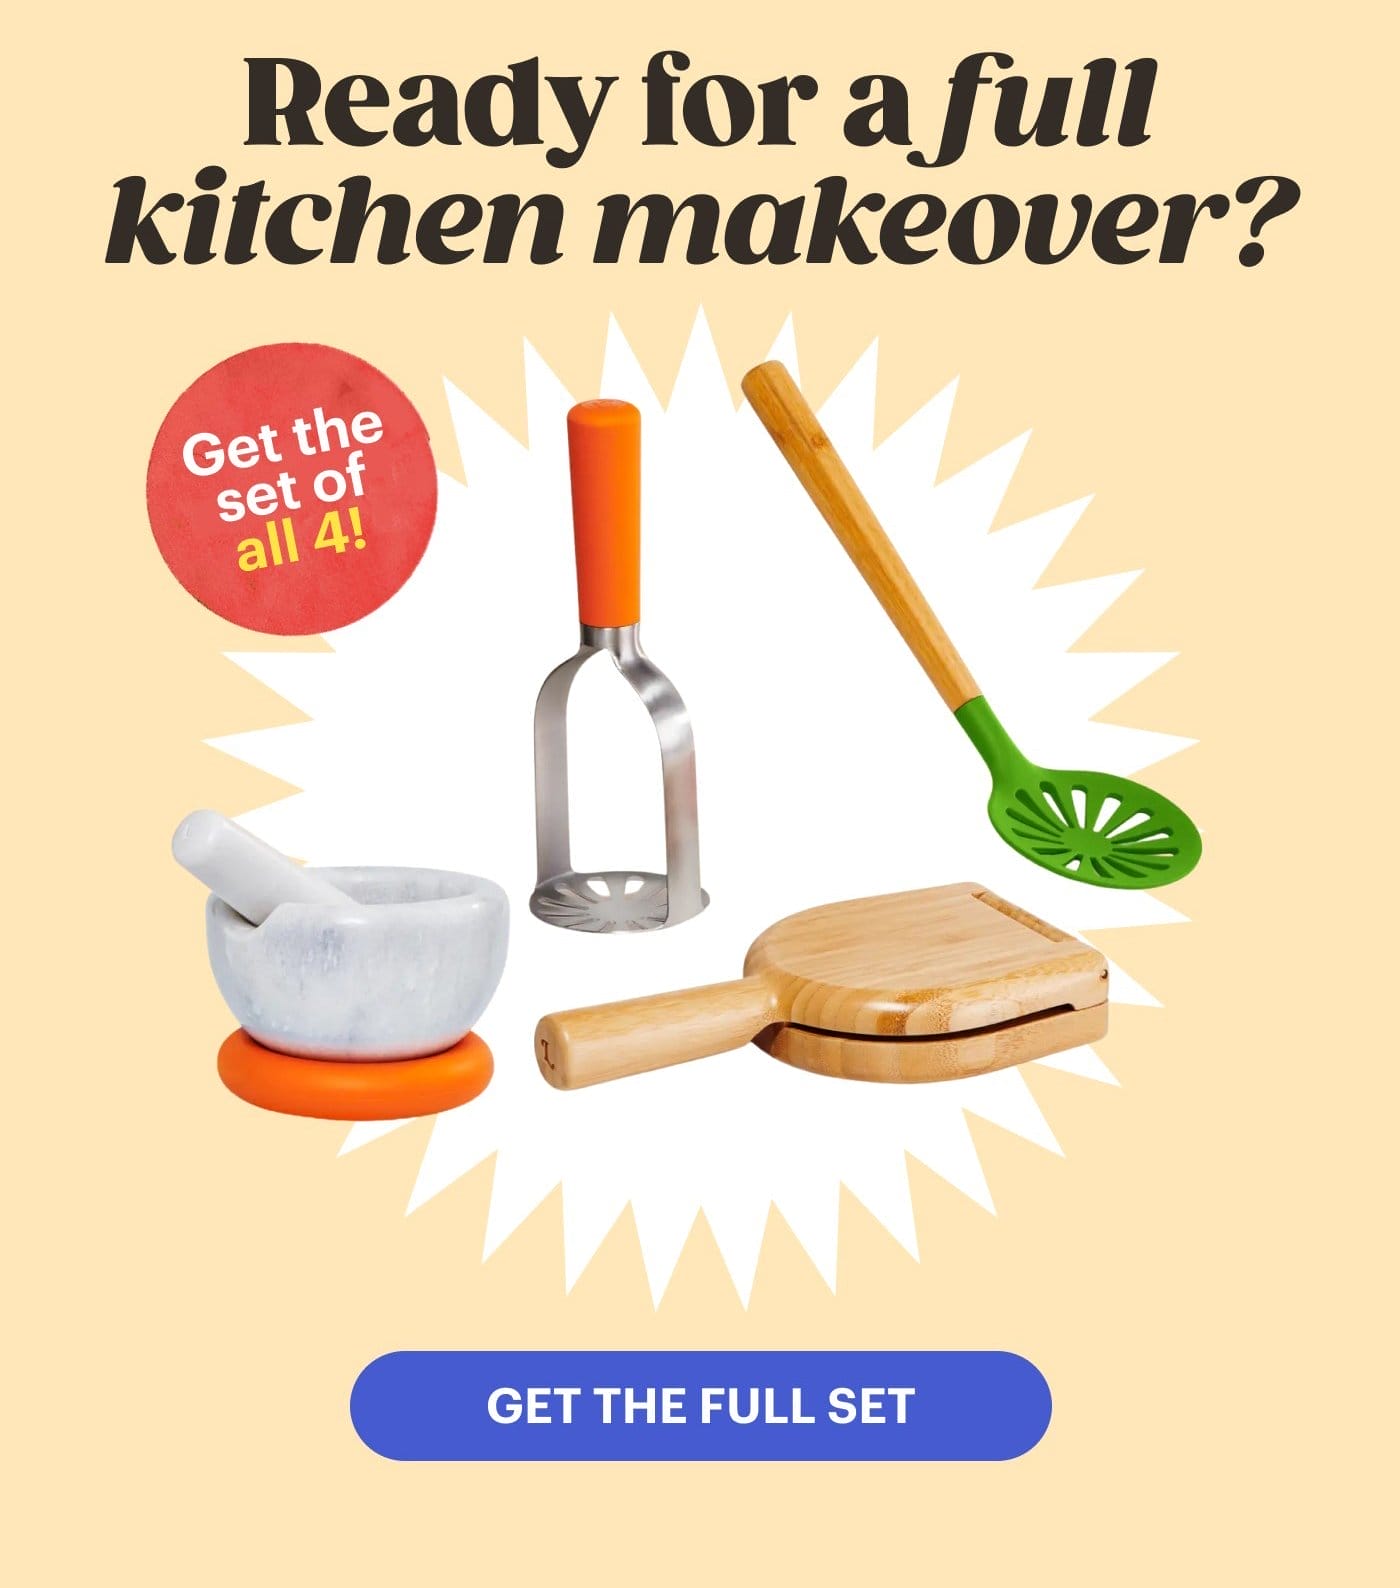 Ready for a full kitchen makeover? Get the set of all 4! GET THE FULL SET